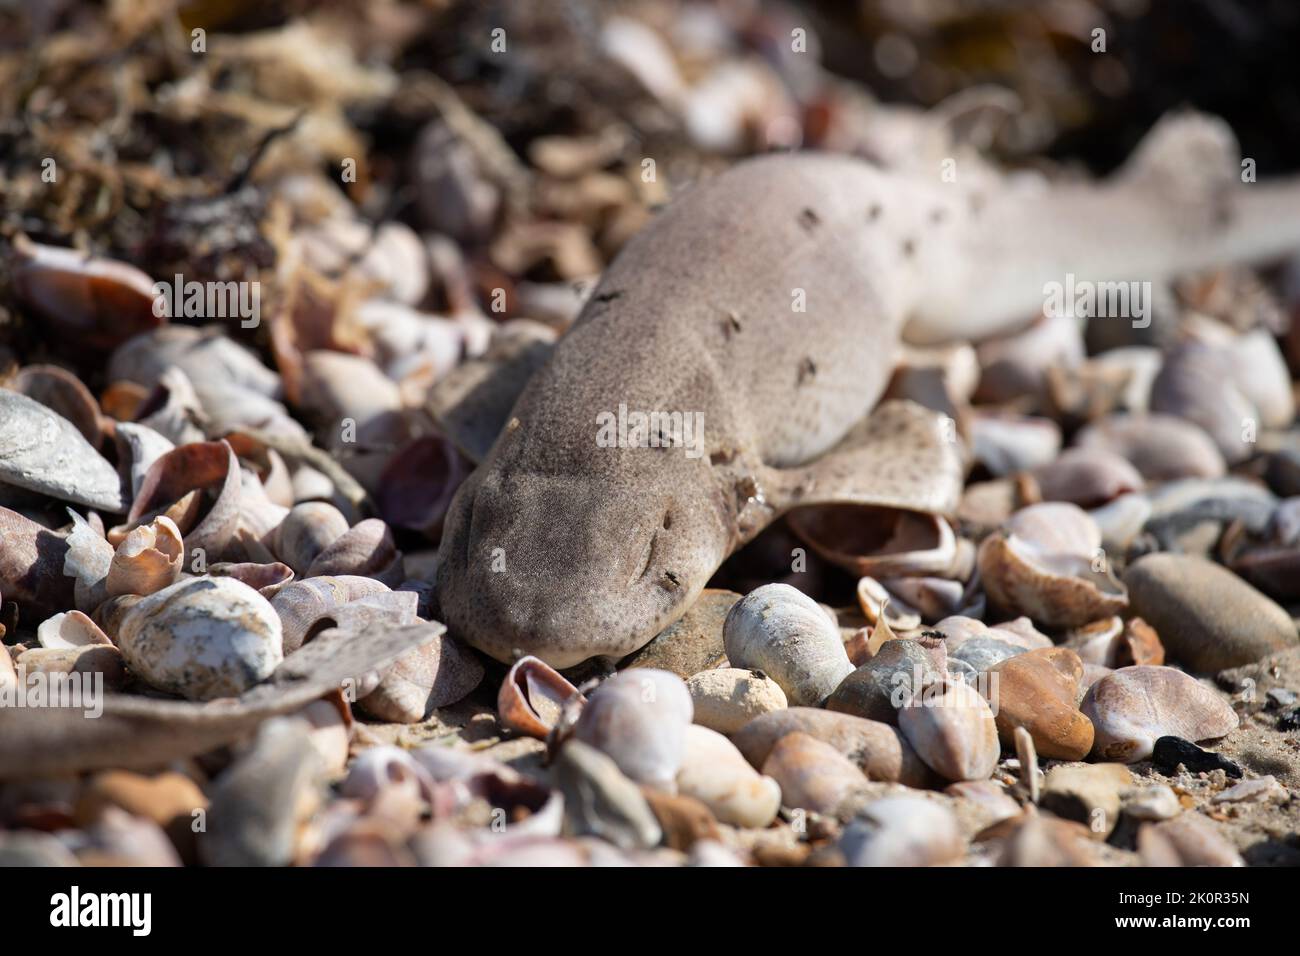 Dead dogfish wash up on Littlehampton beaches at low tide after storms at sea Stock Photo